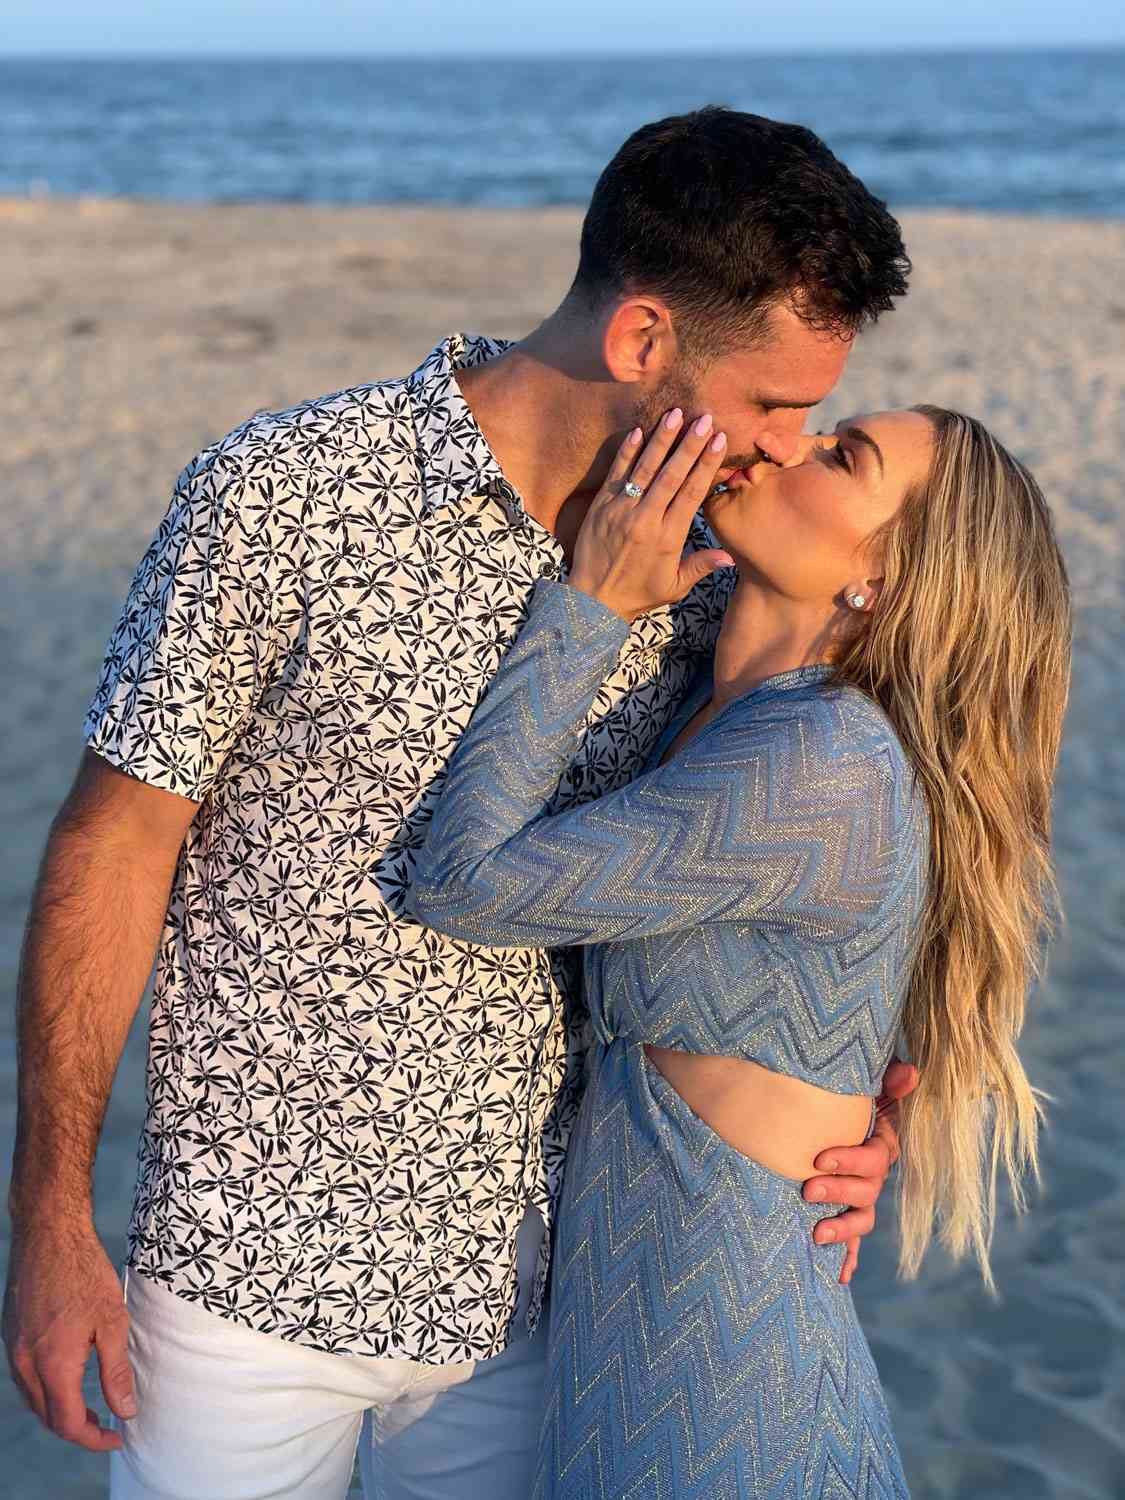 Summer House Stars Lindsay Hubbard and Carl Radke Are Engaged After Romantic Beachside Proposal